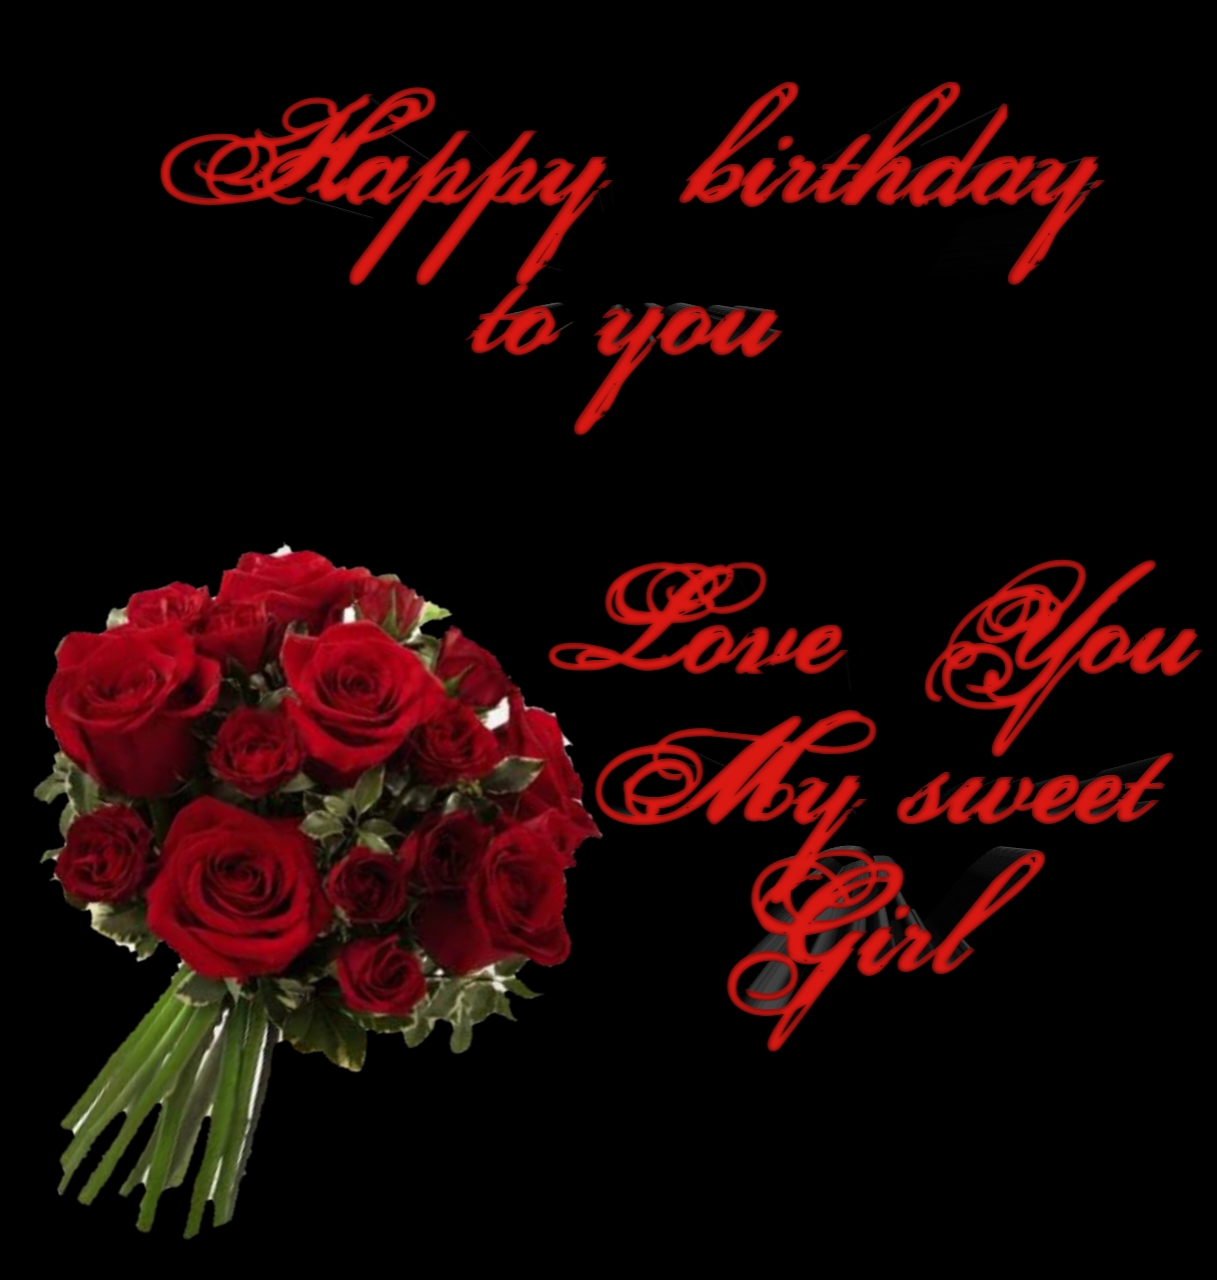 Beautiful Happy Birthday Images Hd Happy Birthday Images For Her Free Beautiful Happy Birthday Images Download Simple Birthday Wishes Png Pic Beautiful Images Image Photo Best Image